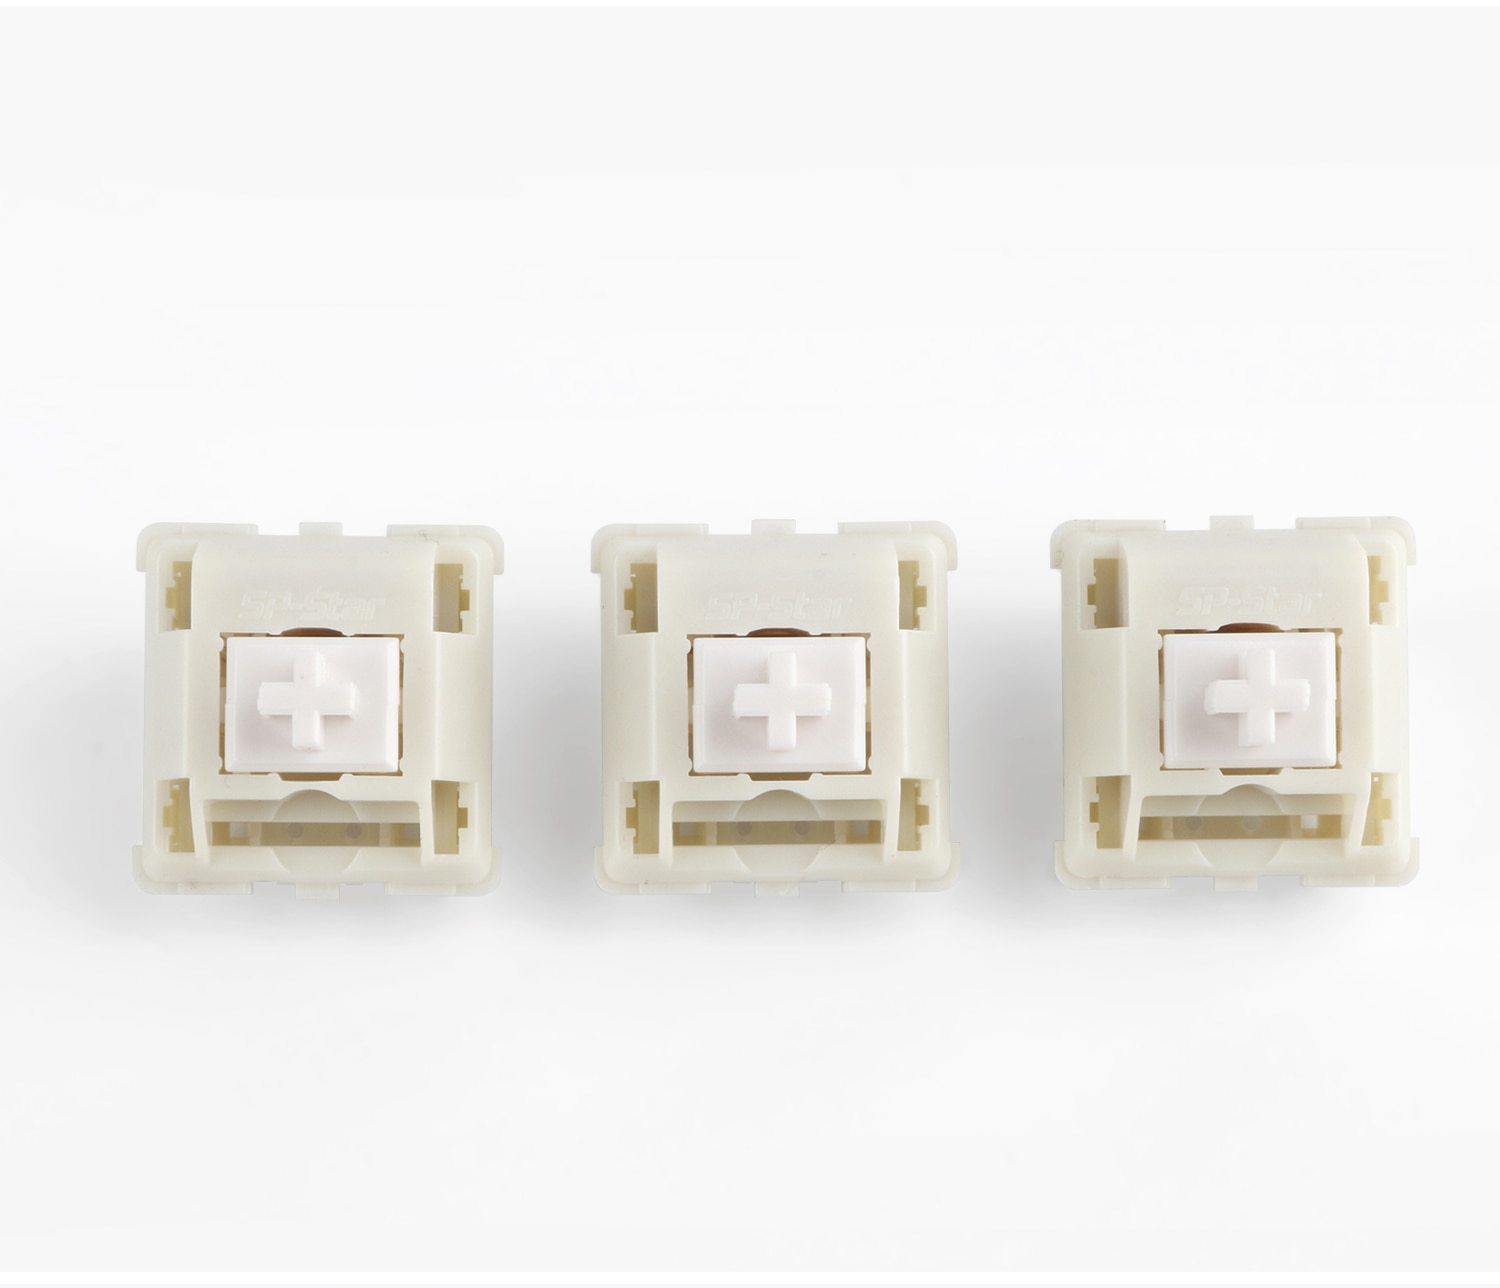 SP-STAR POLE STARS WHITE LINEAR SWITCHES - THE KEYCAP CLUB